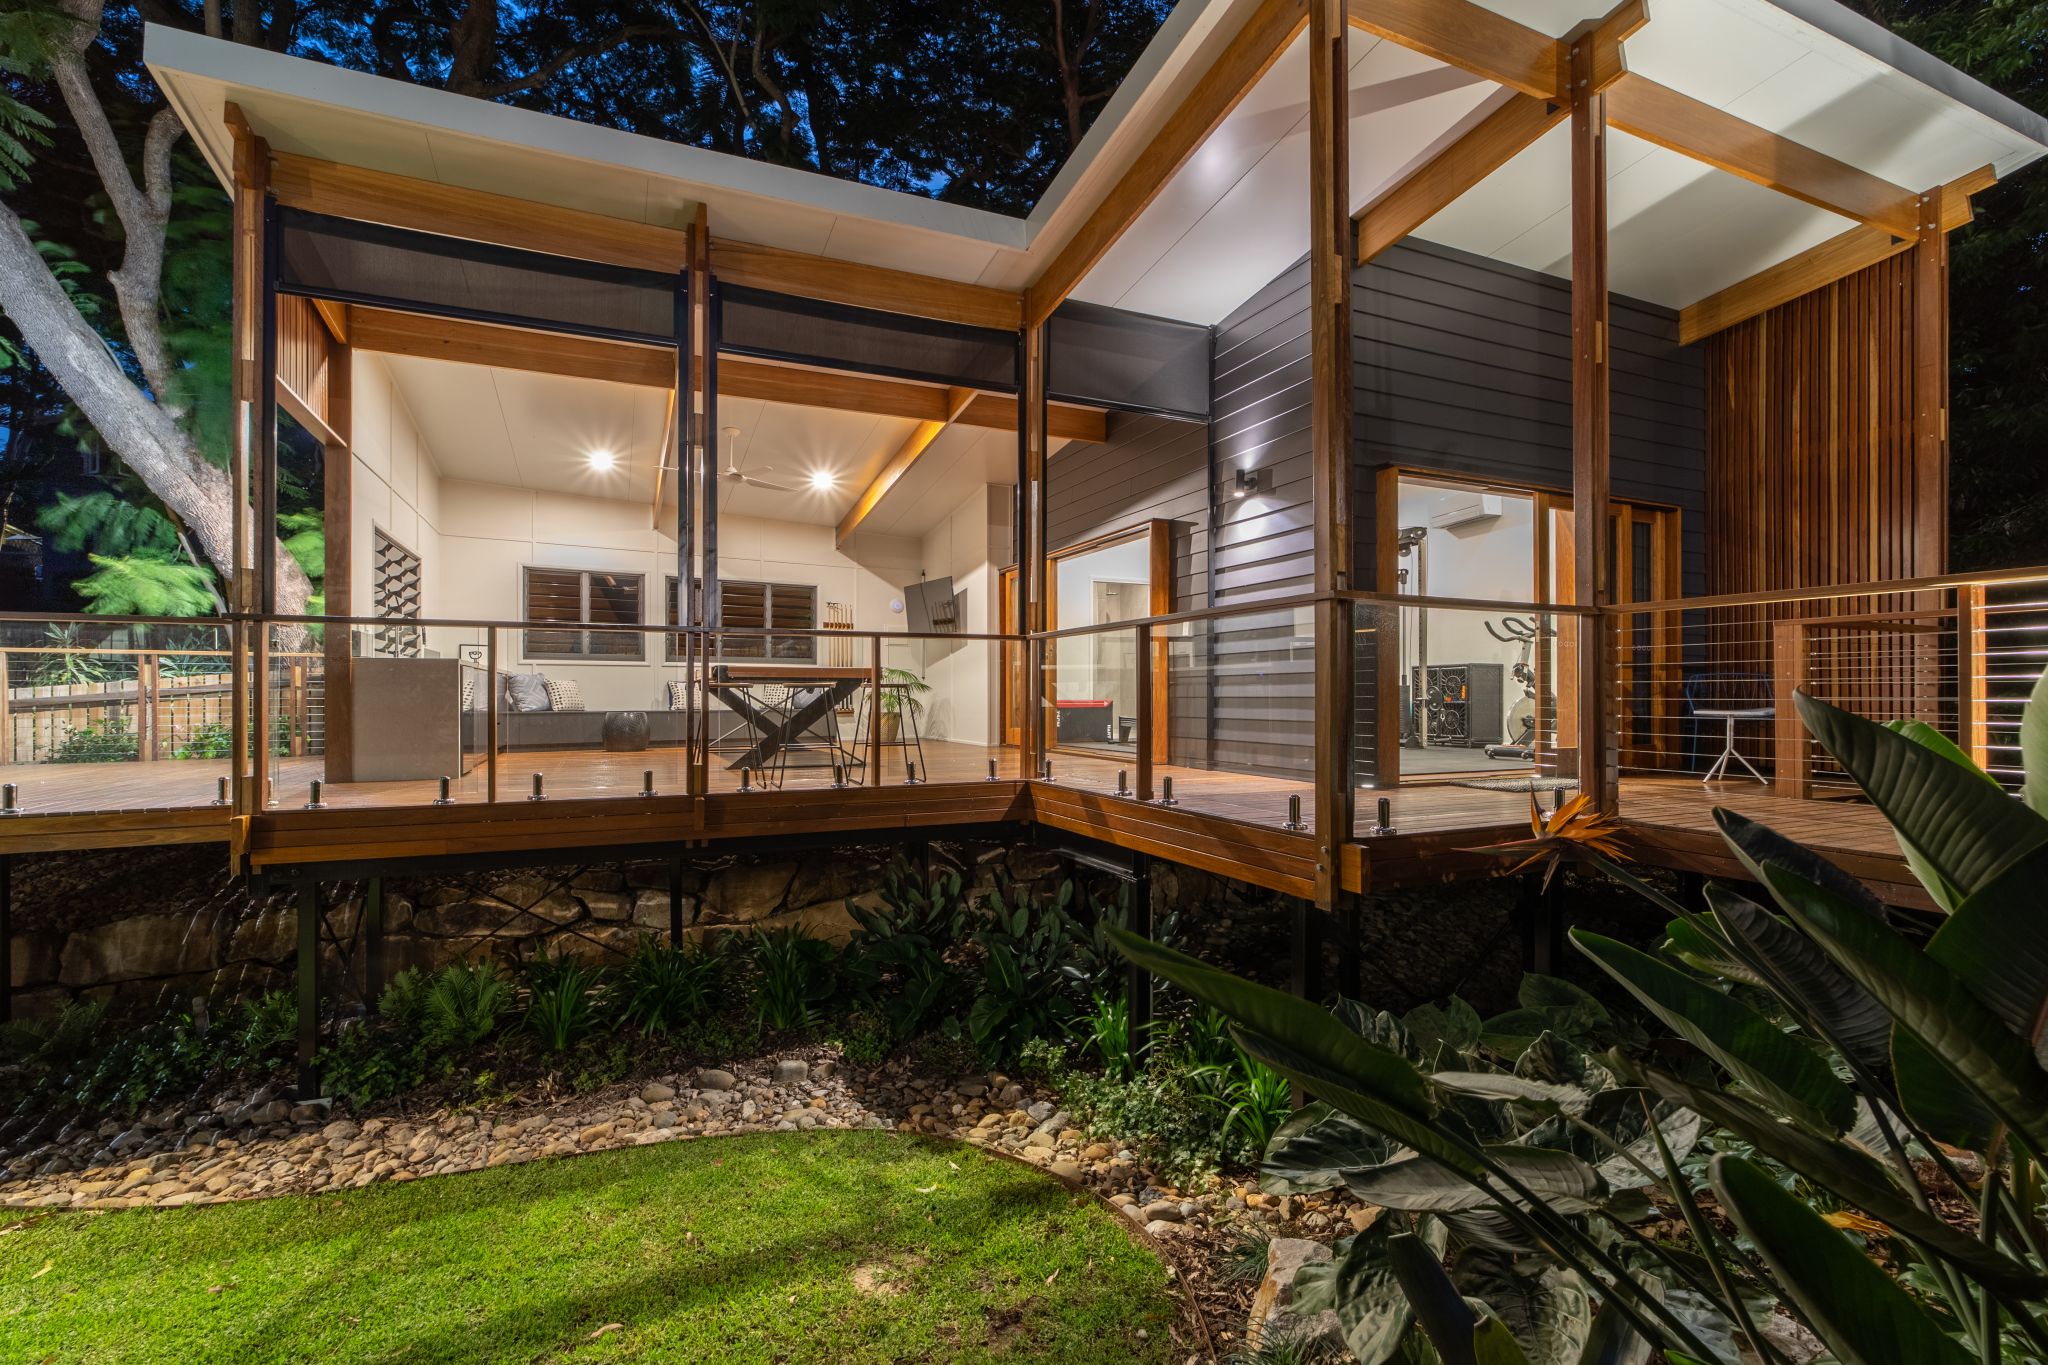 A modern house during twilight, featuring a wooden deck with EnduroShield-treated glass railings, reflecting the warm glow of the interior lights. The house is surrounded by lush greenery, and the deck leads to an open-concept interior with visible gym equipment. The structure showcases a combination of dark grey siding, natural wood posts, and a white flat roof, harmoniously blending with the natural environment.